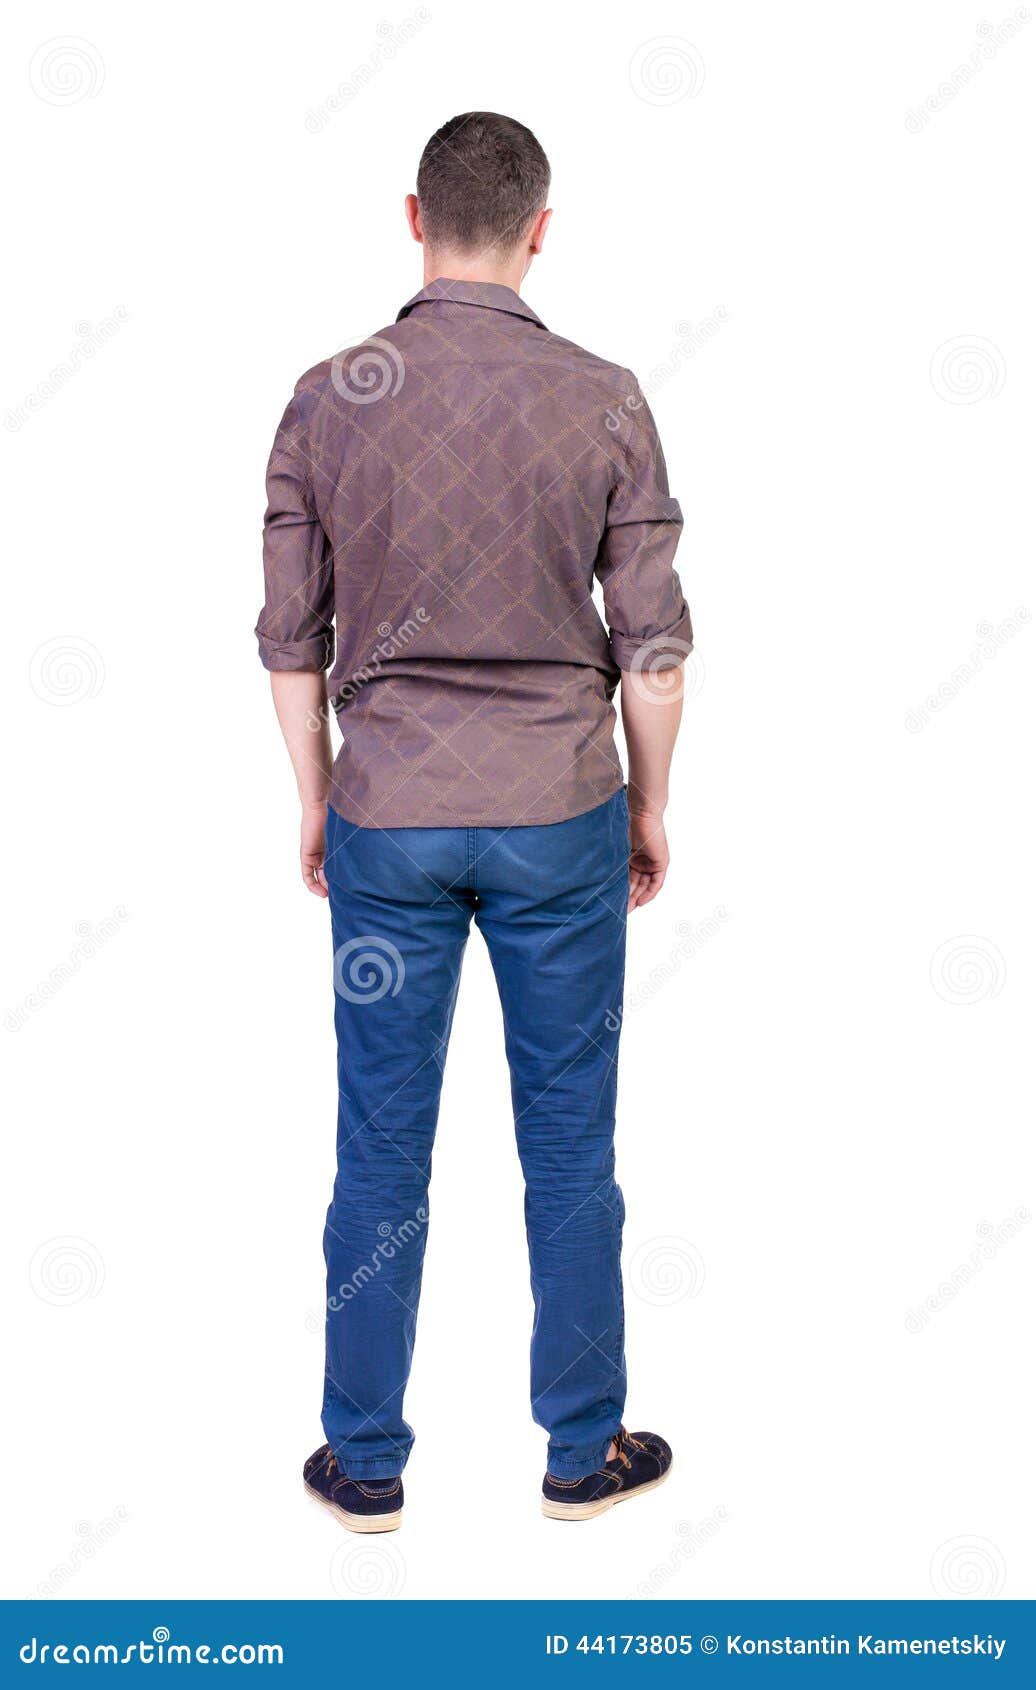 Back View of Handsome Man in Shirt Looking Up. Stock Image - Image of ...